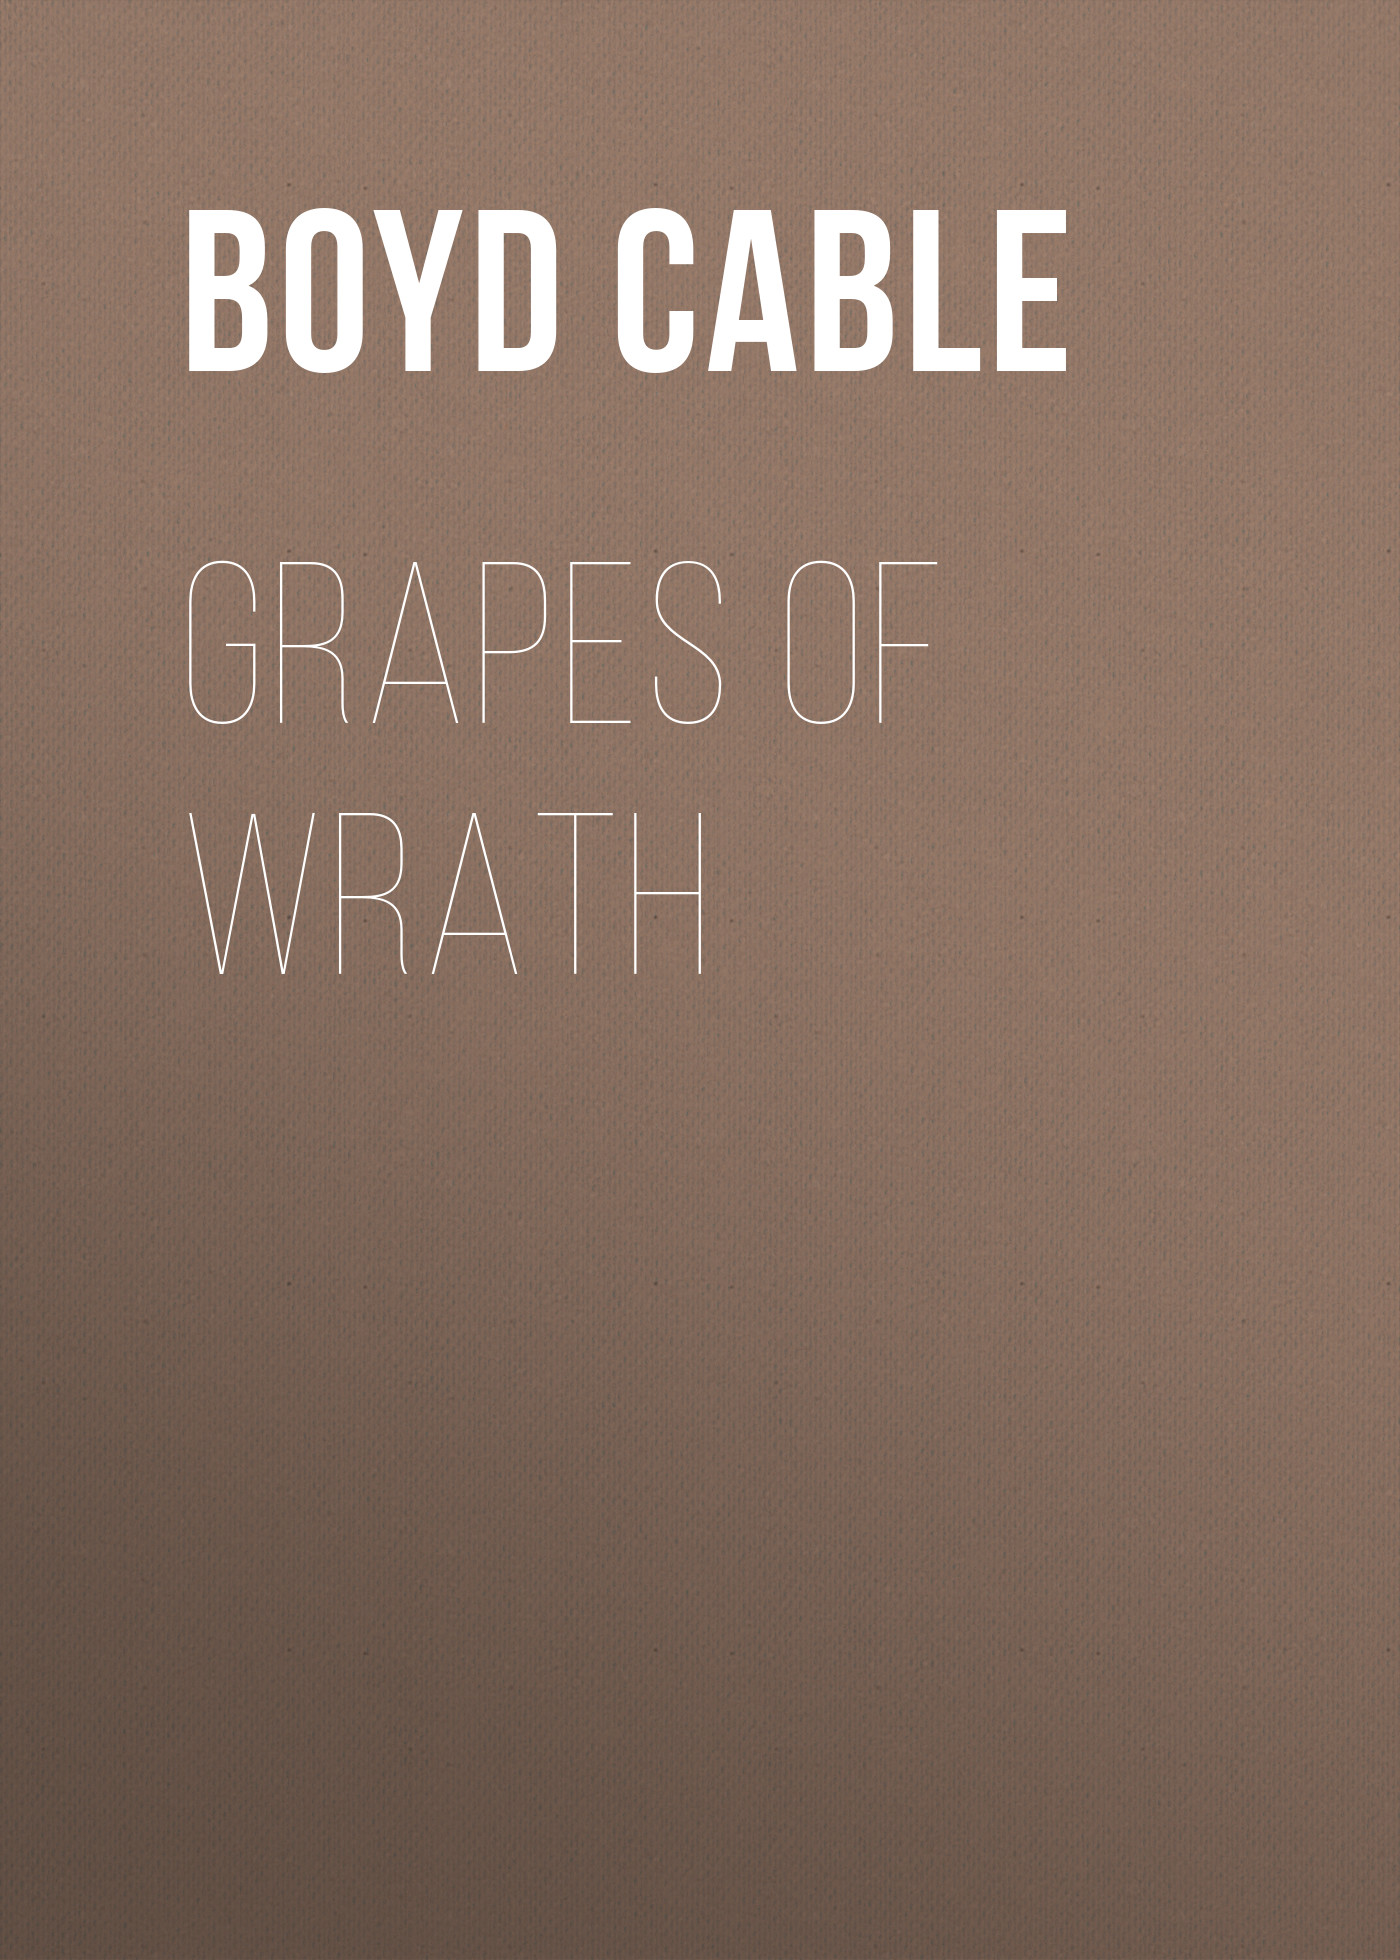 Cable Boyd Grapes of wrath